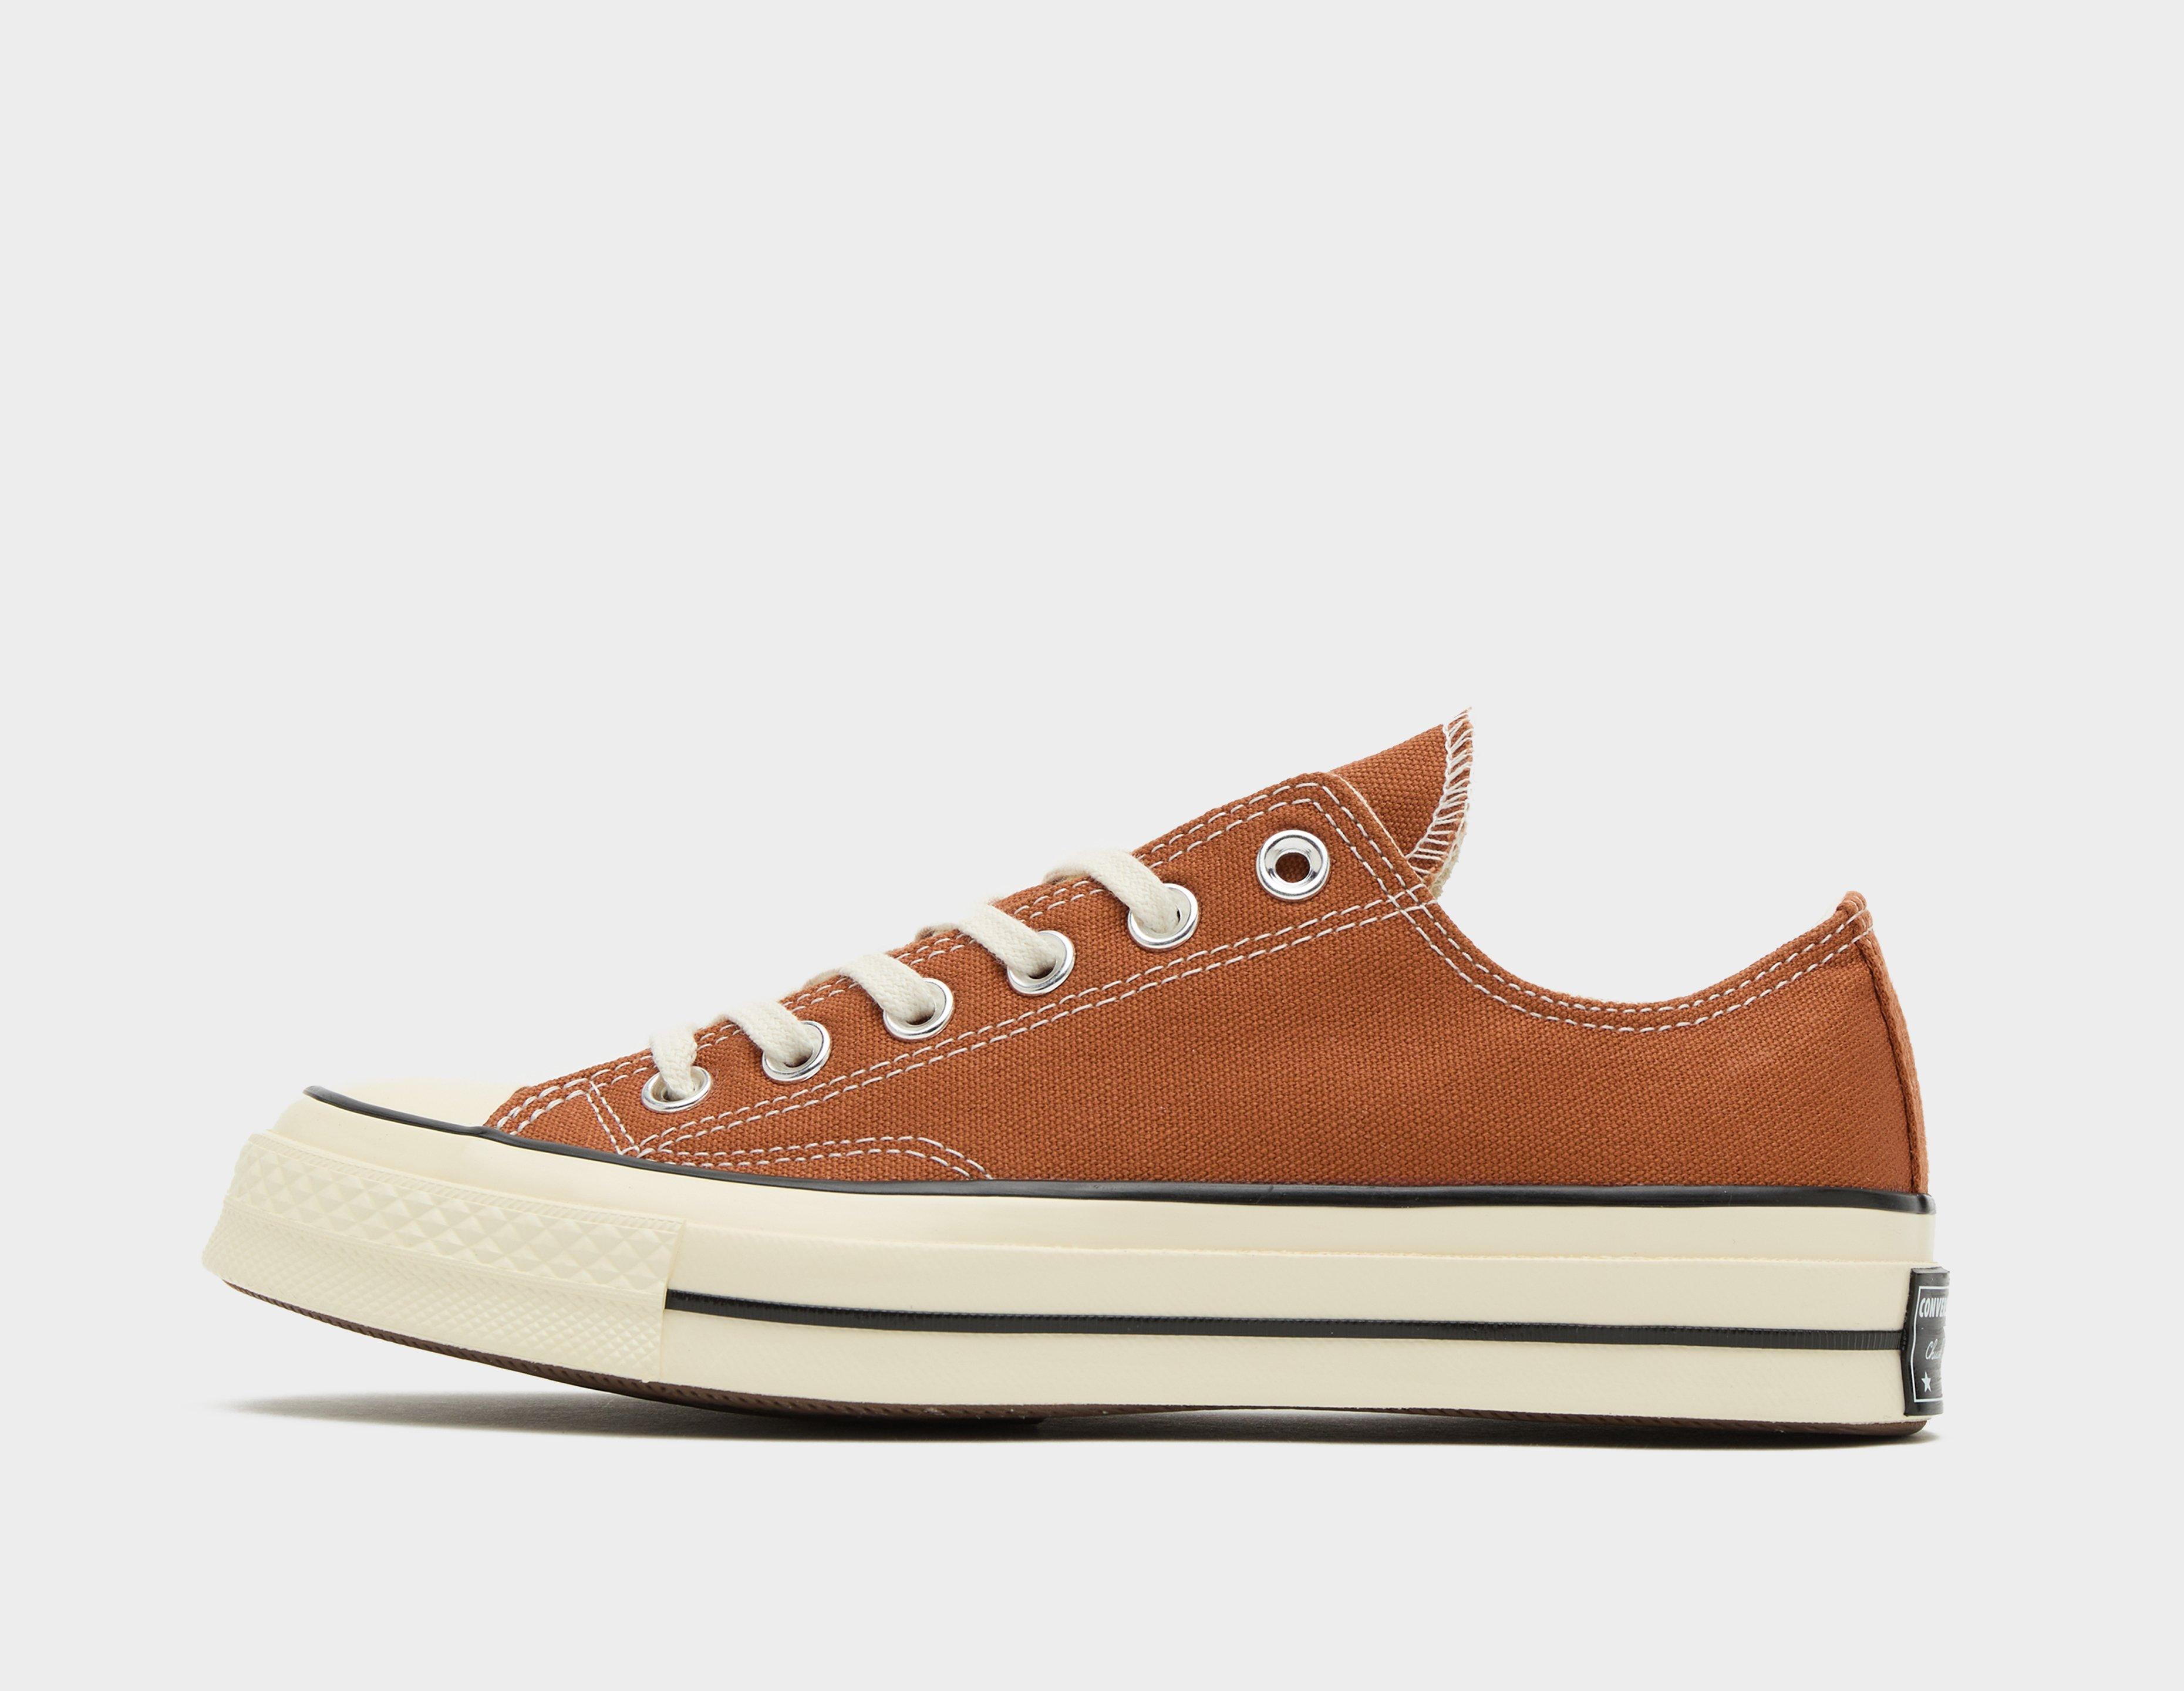 prinsesse os selv Alligevel converse unisex twisted prep chuck 70 high top rush blueuniversity red |  Brown Converse Chuck 70 Ox Low Women's | Healthdesign?